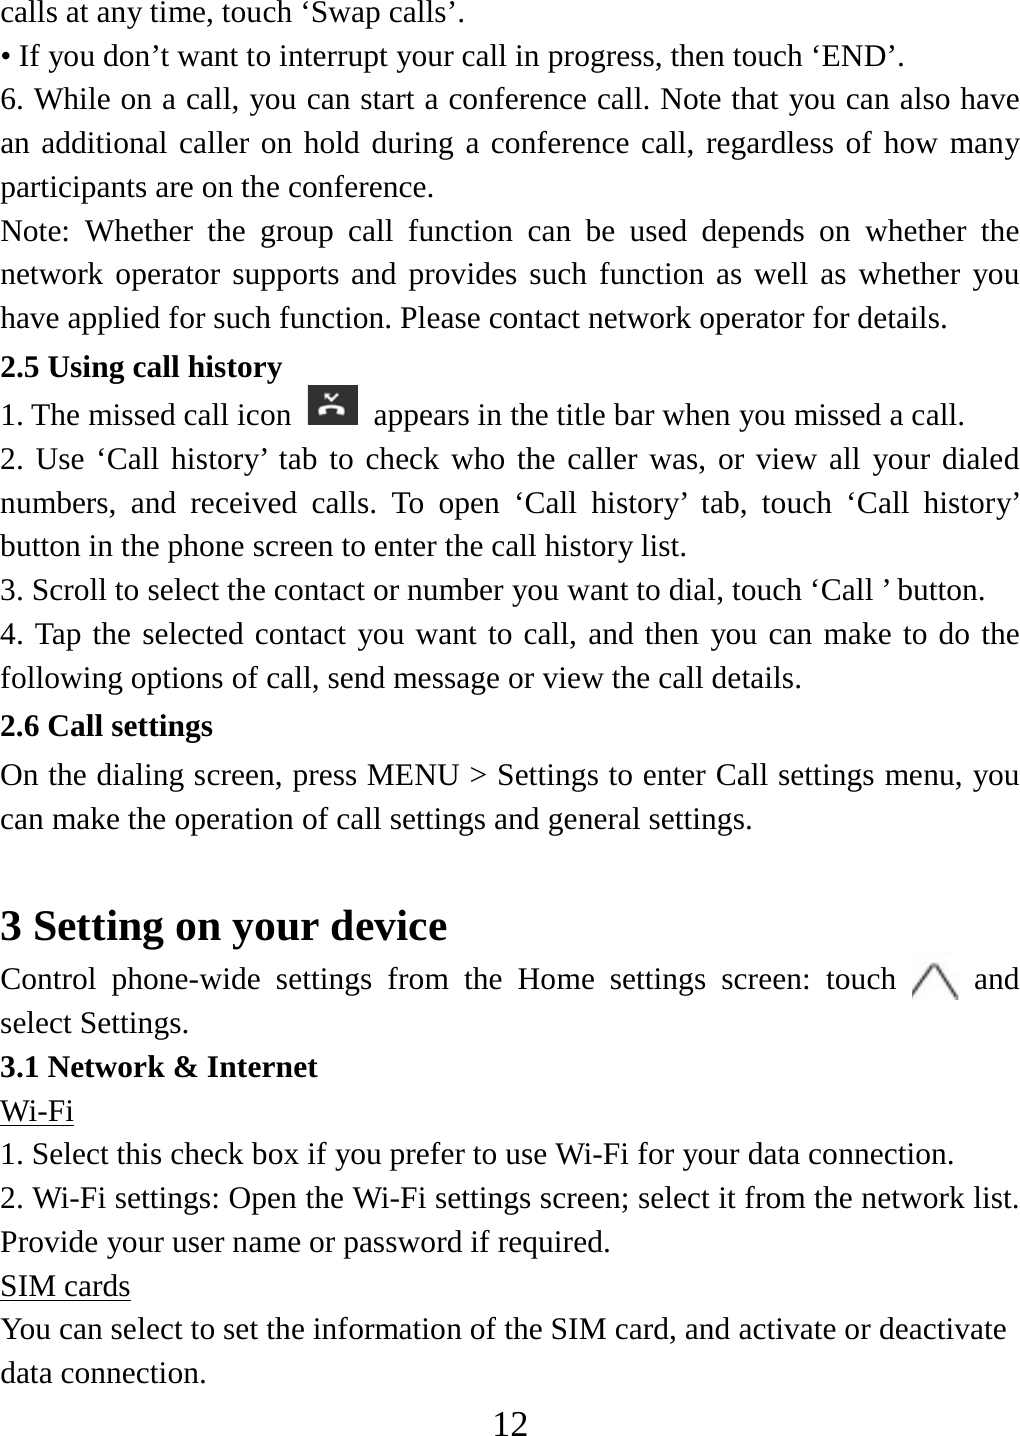   12calls at any time, touch ‘Swap calls’. • If you don’t want to interrupt your call in progress, then touch ‘END’.   6. While on a call, you can start a conference call. Note that you can also have an additional caller on hold during a conference call, regardless of how many participants are on the conference.   Note: Whether the group call function can be used depends on whether the network operator supports and provides such function as well as whether you have applied for such function. Please contact network operator for details. 2.5 Using call history 1. The missed call icon   appears in the title bar when you missed a call.   2. Use ‘Call history’ tab to check who the caller was, or view all your dialed numbers, and received calls. To open ‘Call history’ tab, touch ‘Call history’ button in the phone screen to enter the call history list. 3. Scroll to select the contact or number you want to dial, touch ‘Call ’ button. 4. Tap the selected contact you want to call, and then you can make to do the following options of call, send message or view the call details. 2.6 Call settings On the dialing screen, press MENU &gt; Settings to enter Call settings menu, you can make the operation of call settings and general settings.    3 Setting on your device Control phone-wide settings from the Home settings screen: touch   and select Settings.   3.1 Network &amp; Internet Wi-Fi 1. Select this check box if you prefer to use Wi-Fi for your data connection.   2. Wi-Fi settings: Open the Wi-Fi settings screen; select it from the network list. Provide your user name or password if required.   SIM cards You can select to set the information of the SIM card, and activate or deactivate   data connection. 